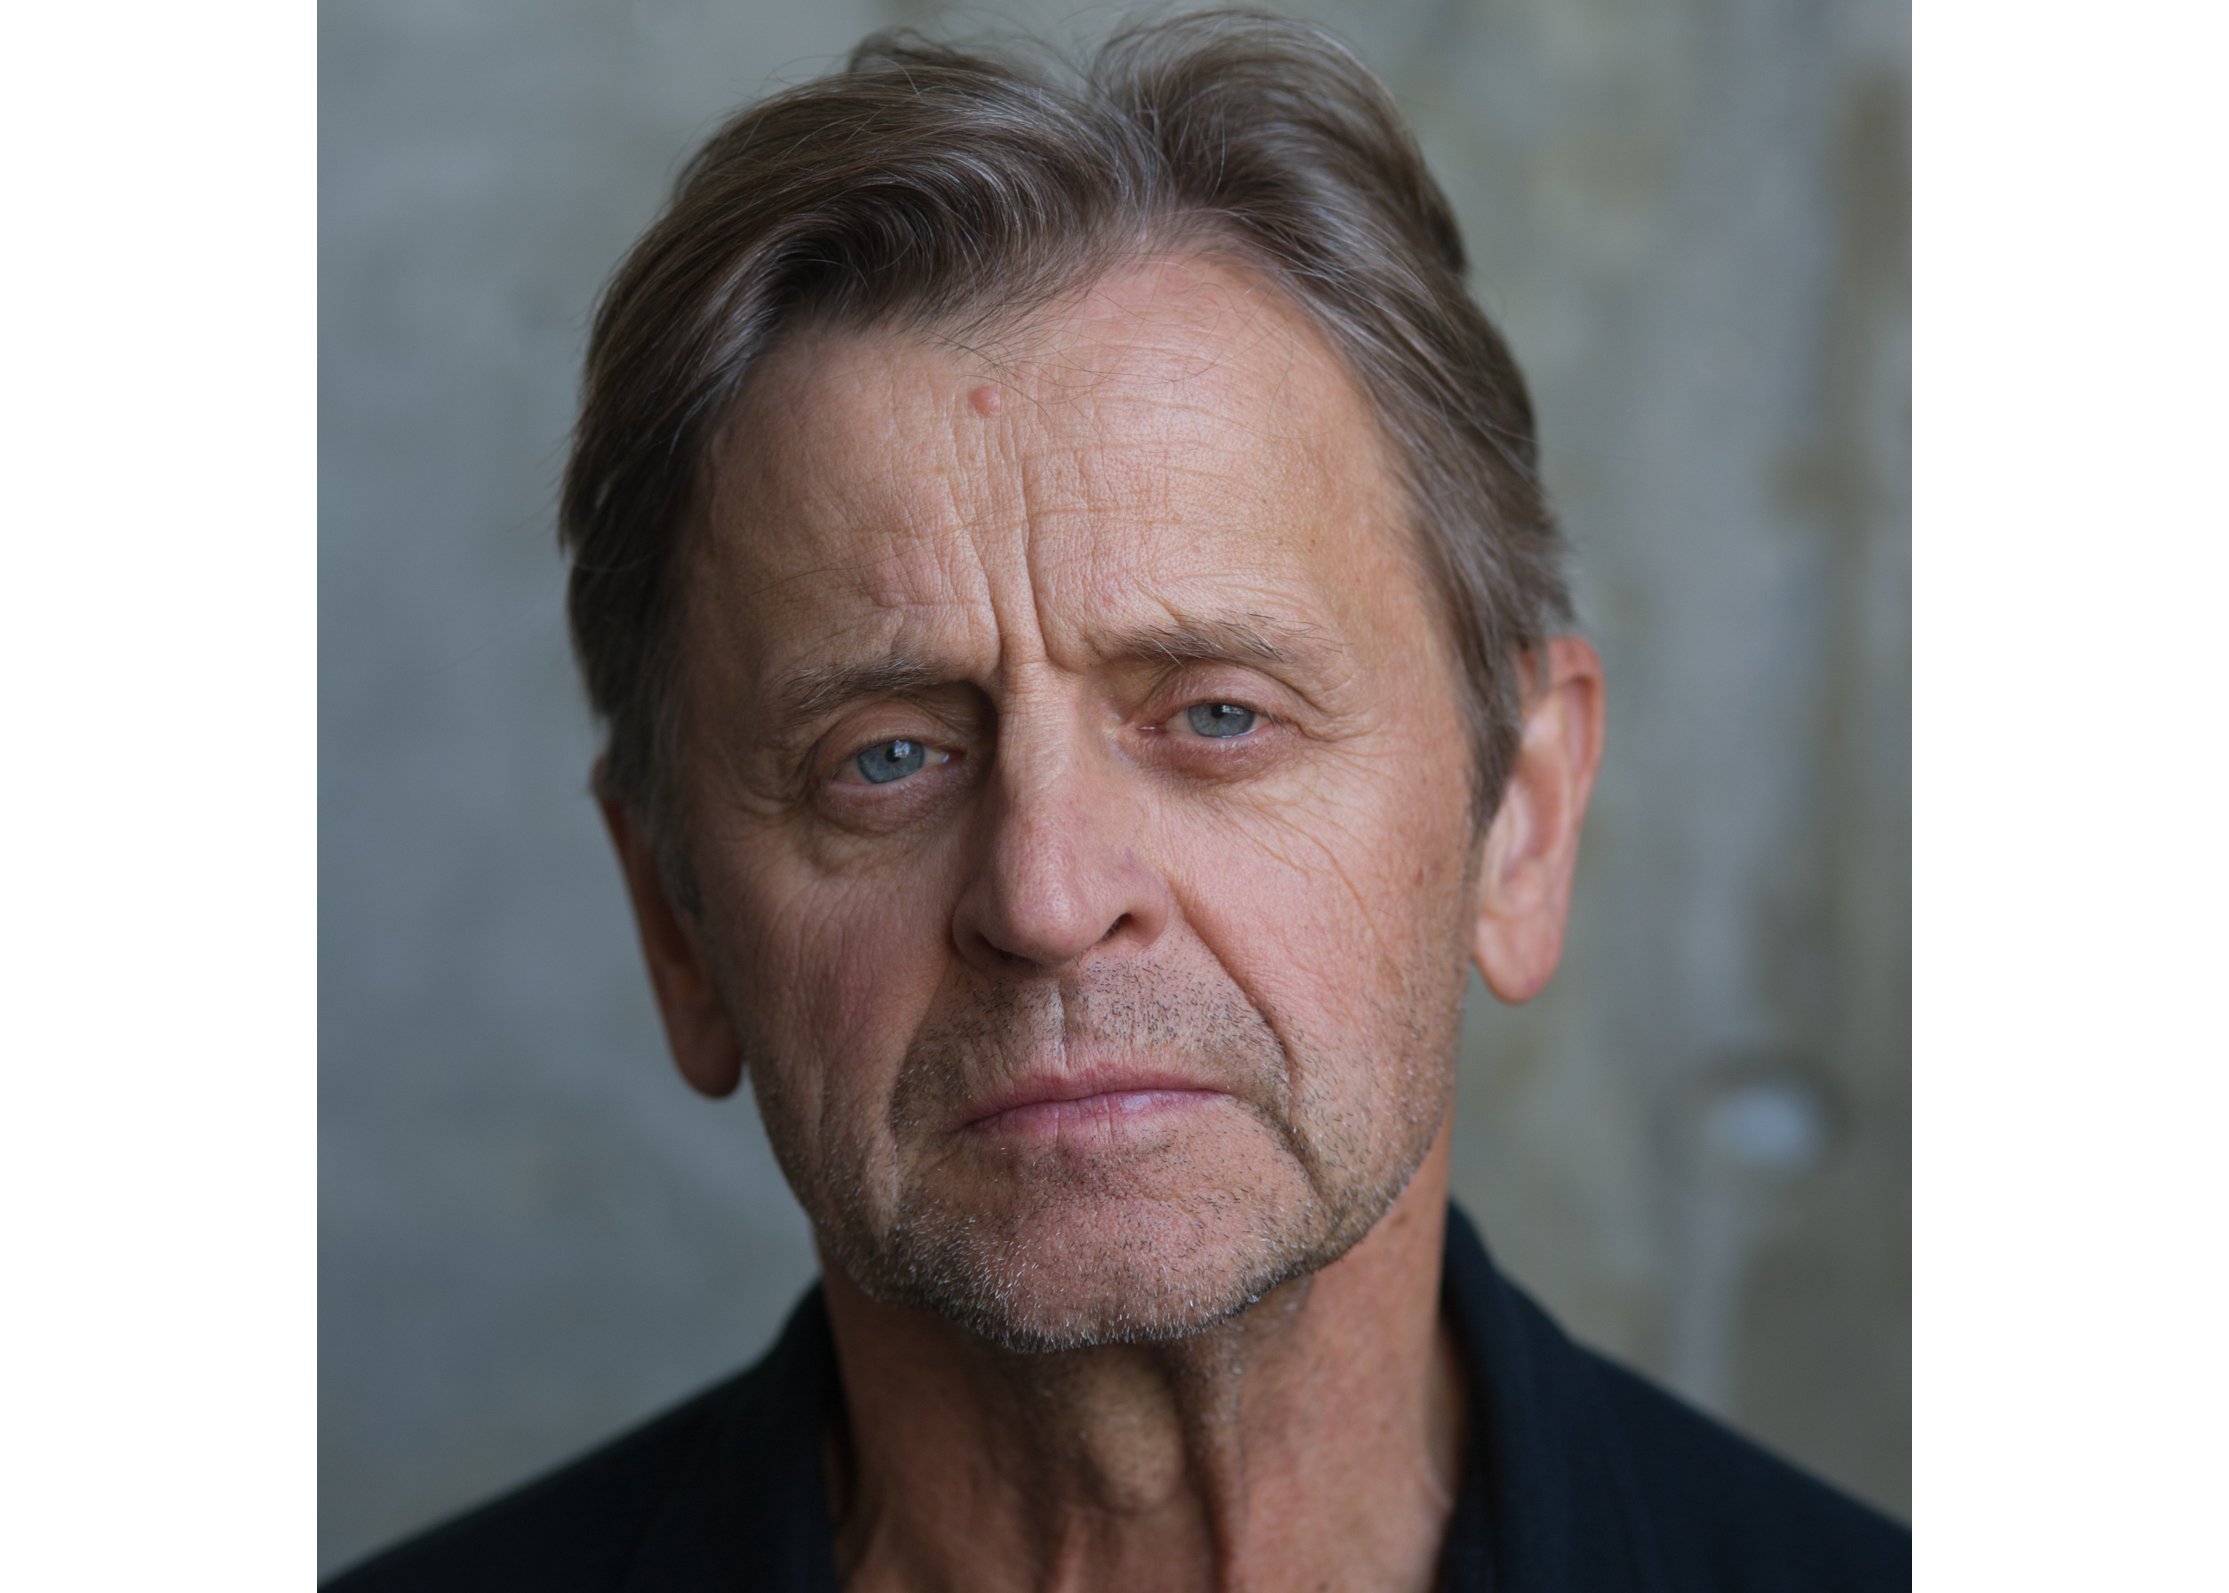 Mikhail Baryshnikov is photographed from the neck up. He wears a black shirt and poses in front of a gray wall. He looks directly at the camera with a calm expression on his face.